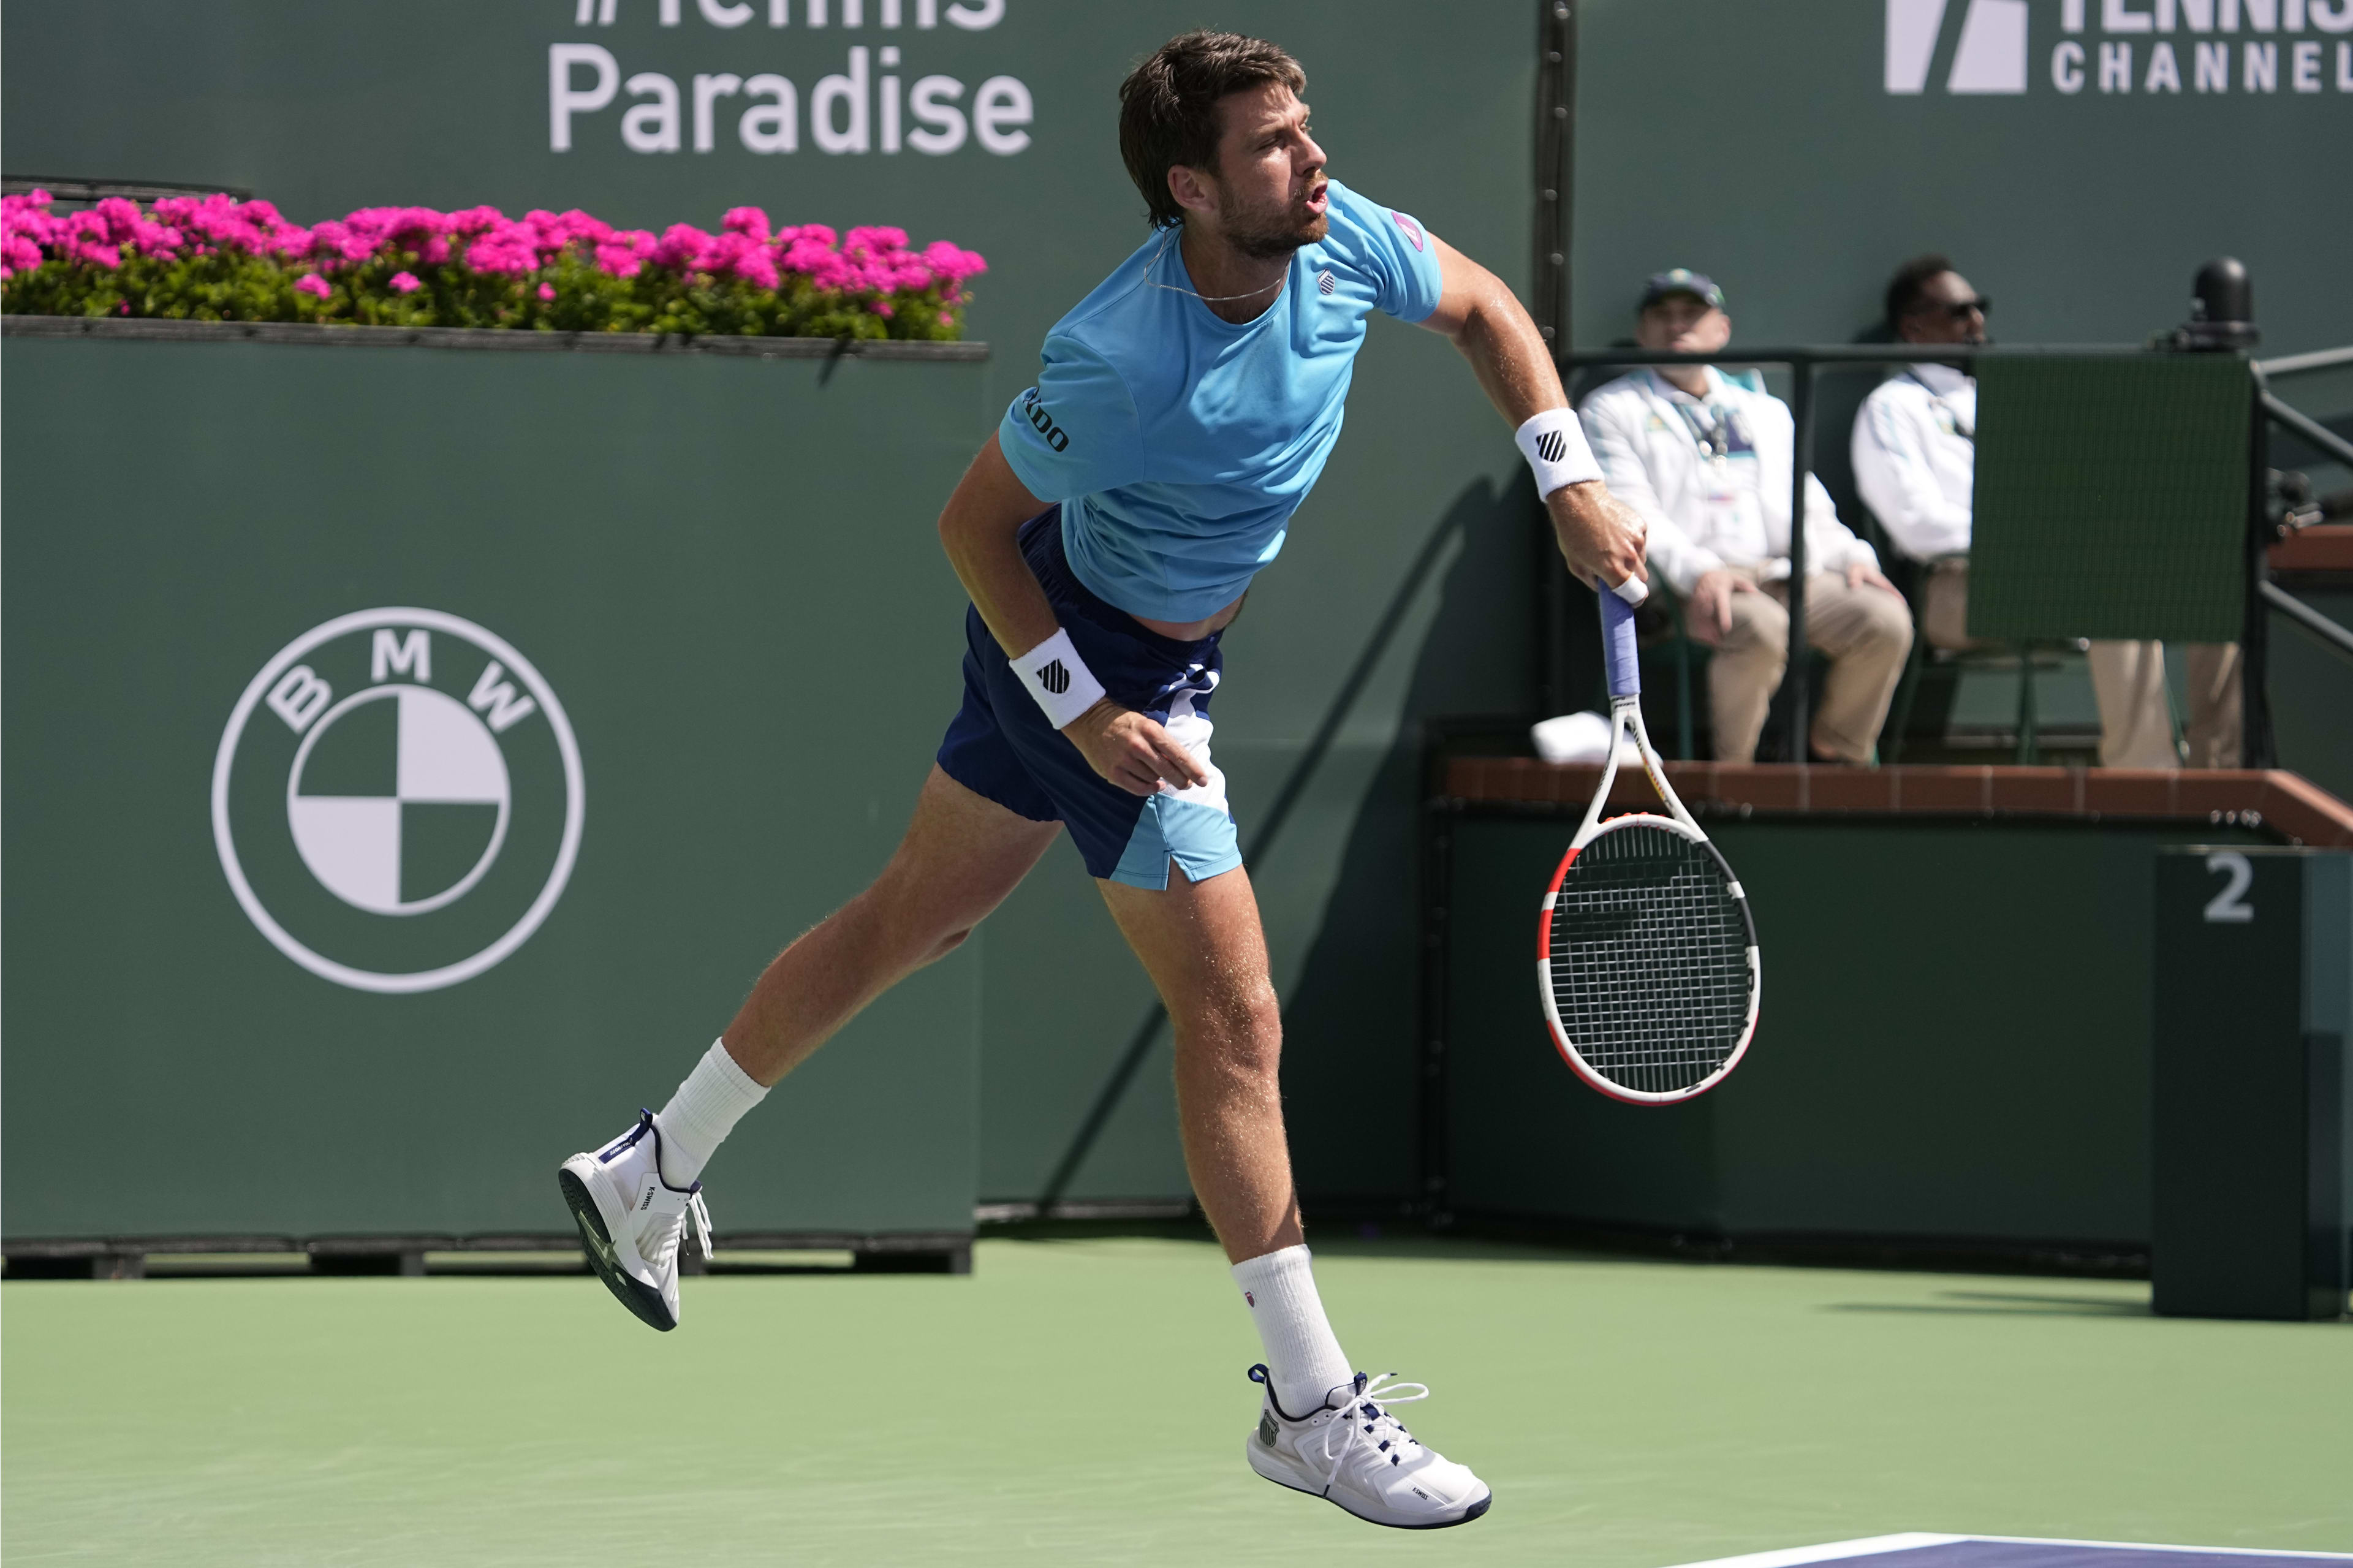 Frances Tiafoe upends Cameron Norrie, Coco Gauff out in Indian Wells